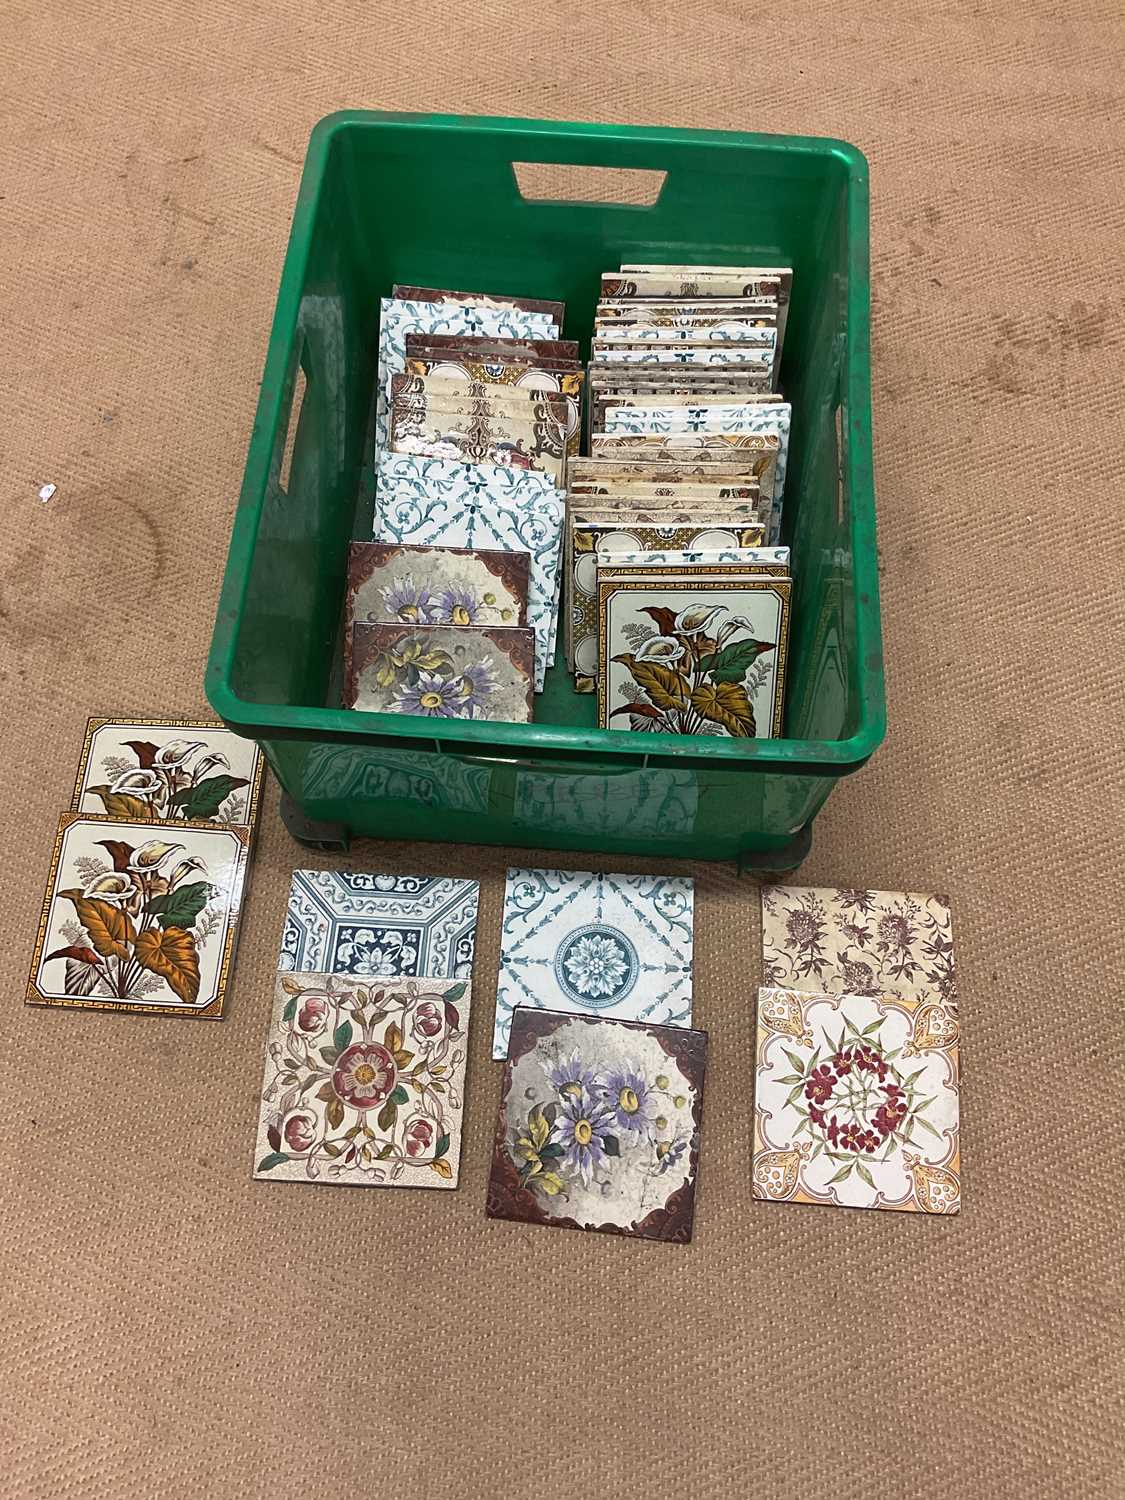 A quantity of 19th century tiles with various floral patterns, each 15.5 x 15.5cm.